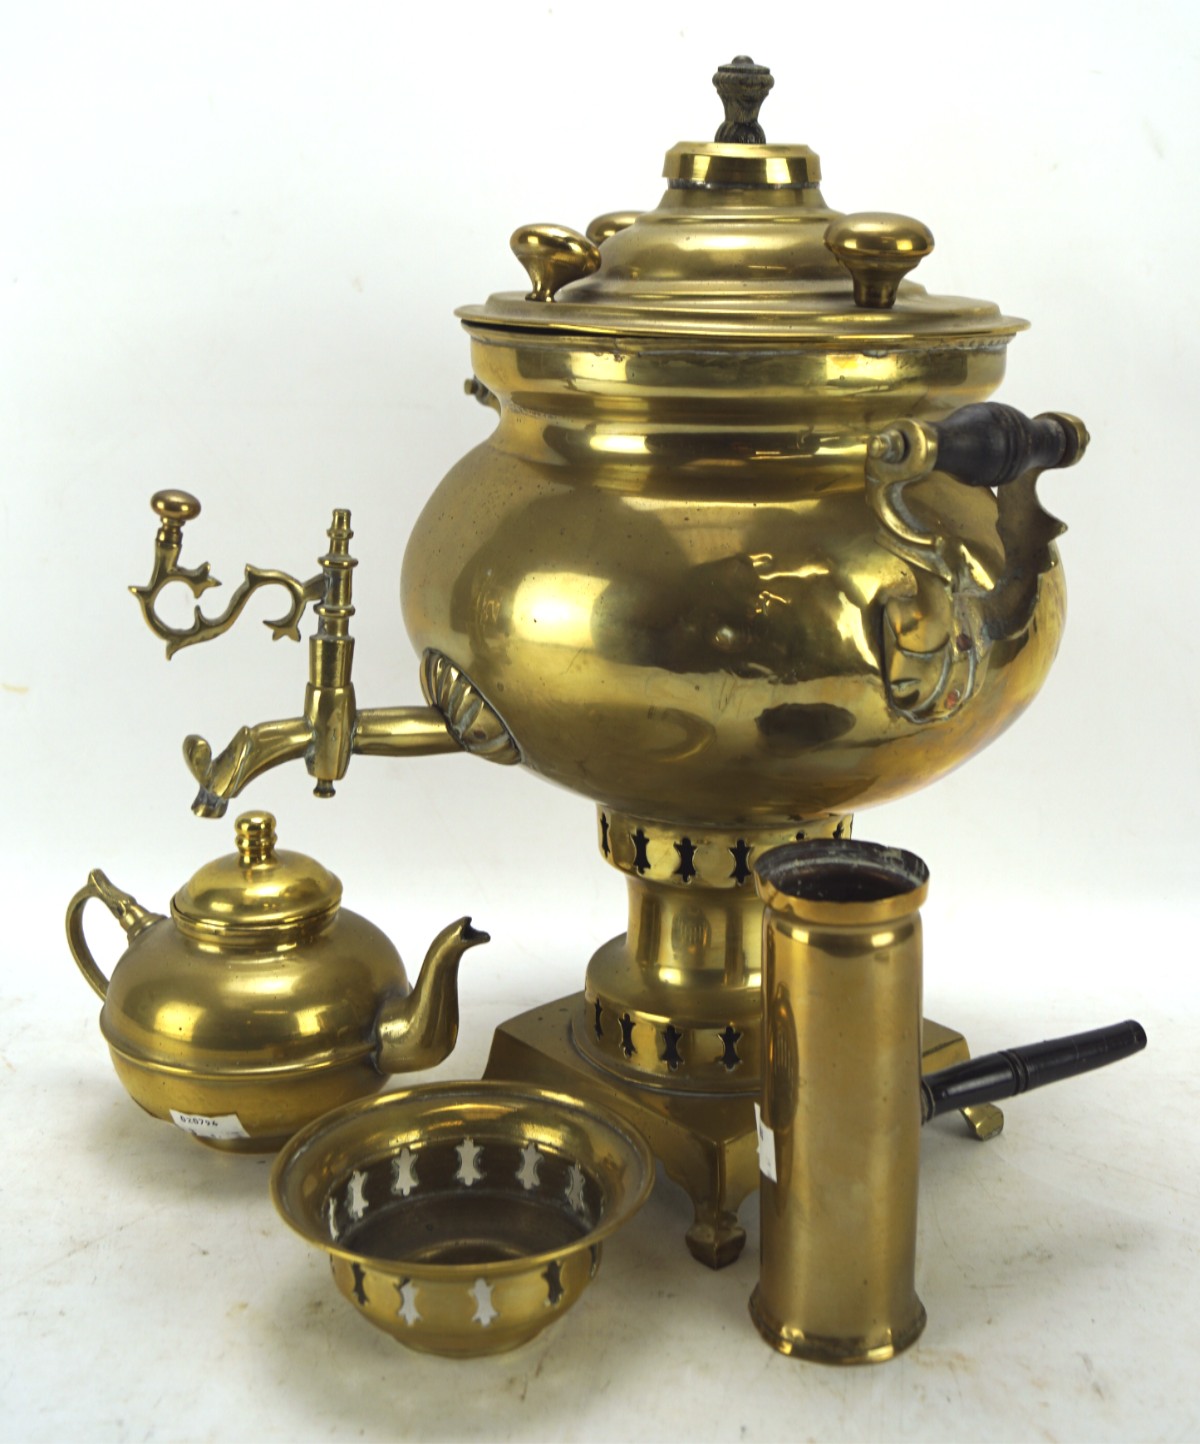 A brass samovar, with strainer and teapot,